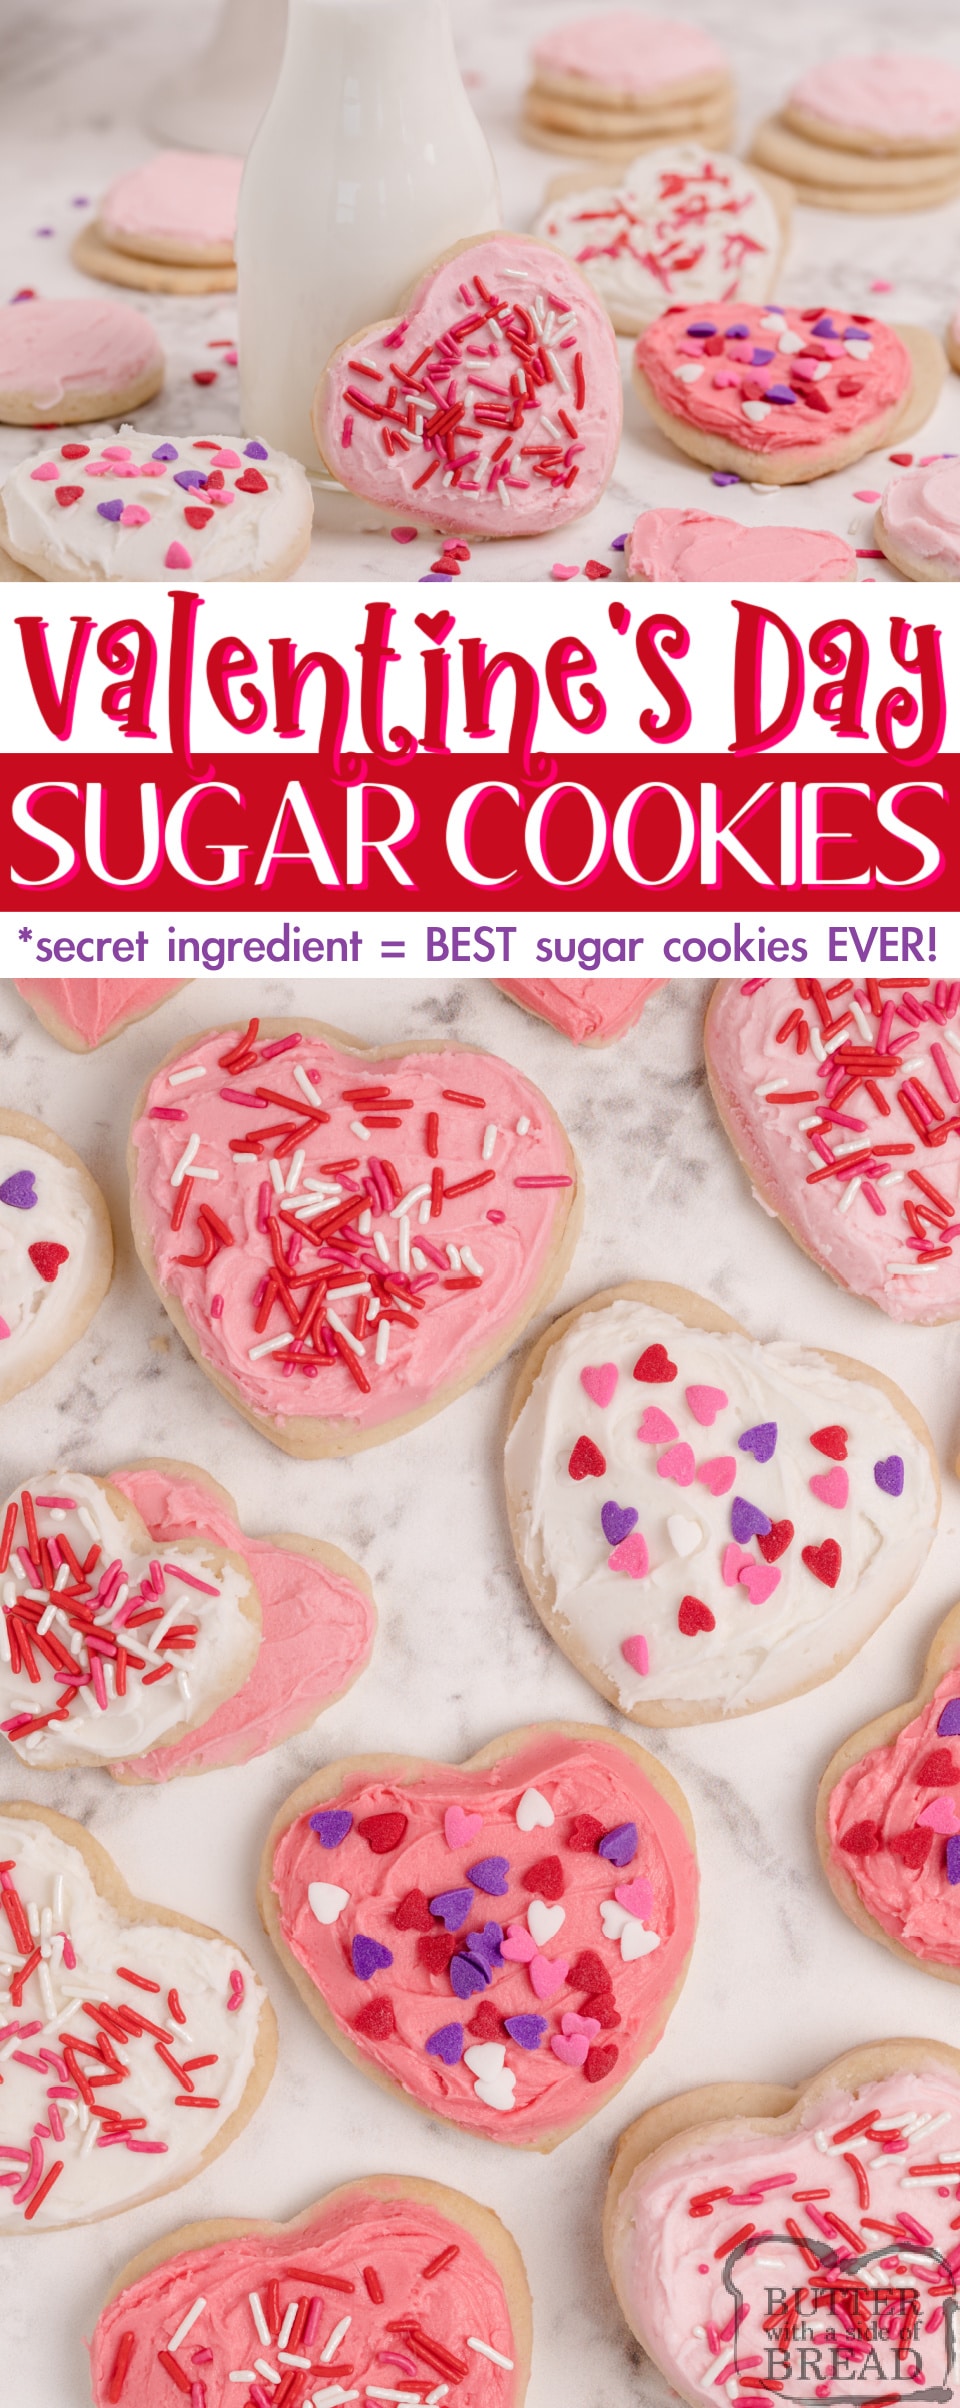 Valentines Sugar Cookies are soft, thick and easily the best sugar cookie recipe I’ve ever tried. These cream cheese sugar cookies are perfectly sweet and they hold their shape when baked!